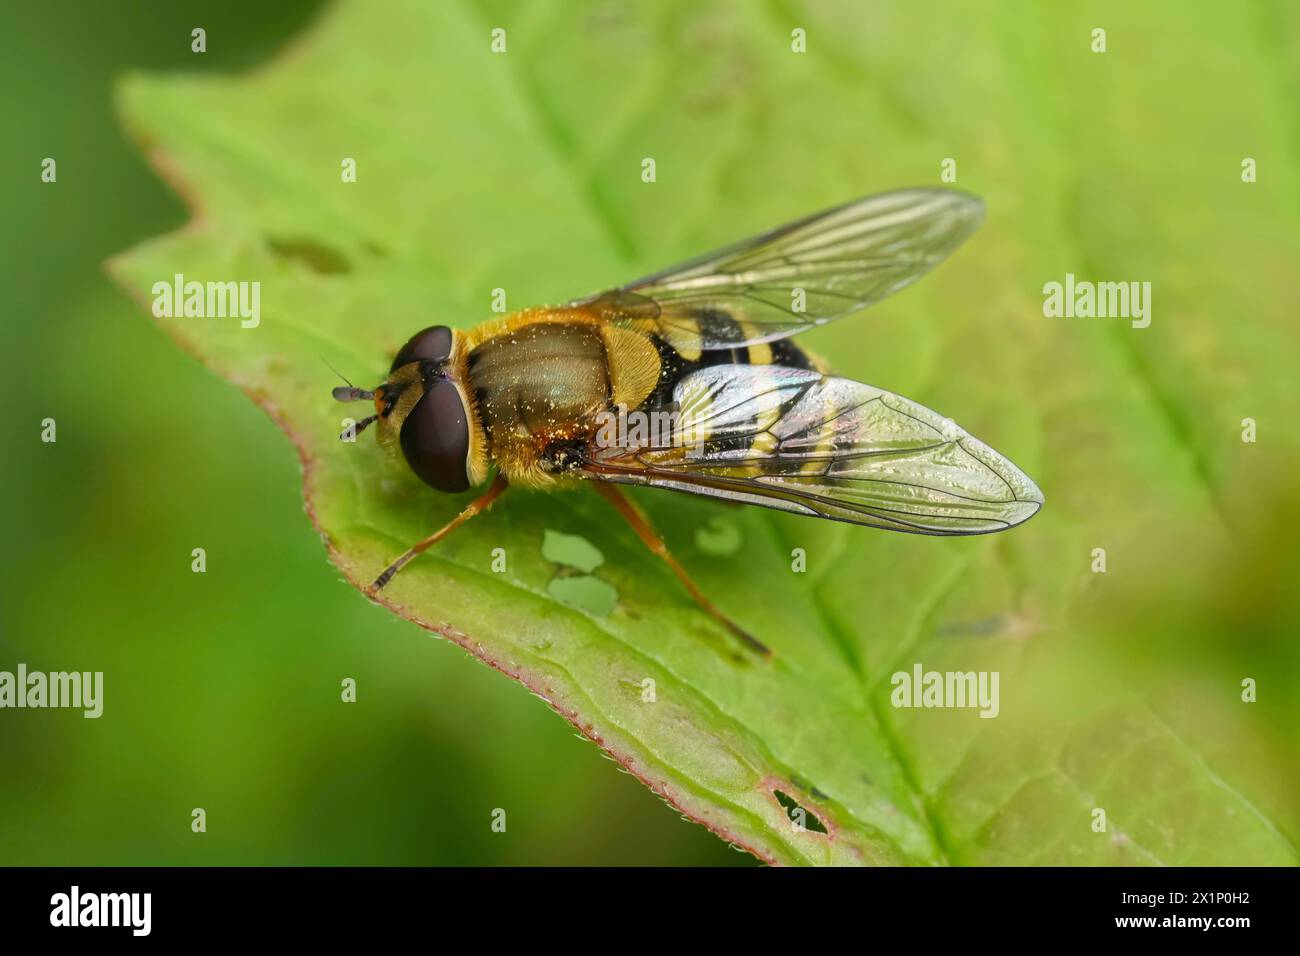 Detailed closeup on the European Common banded hoverfly, Syrphus ribesii sitting on a green leaf Stock Photo